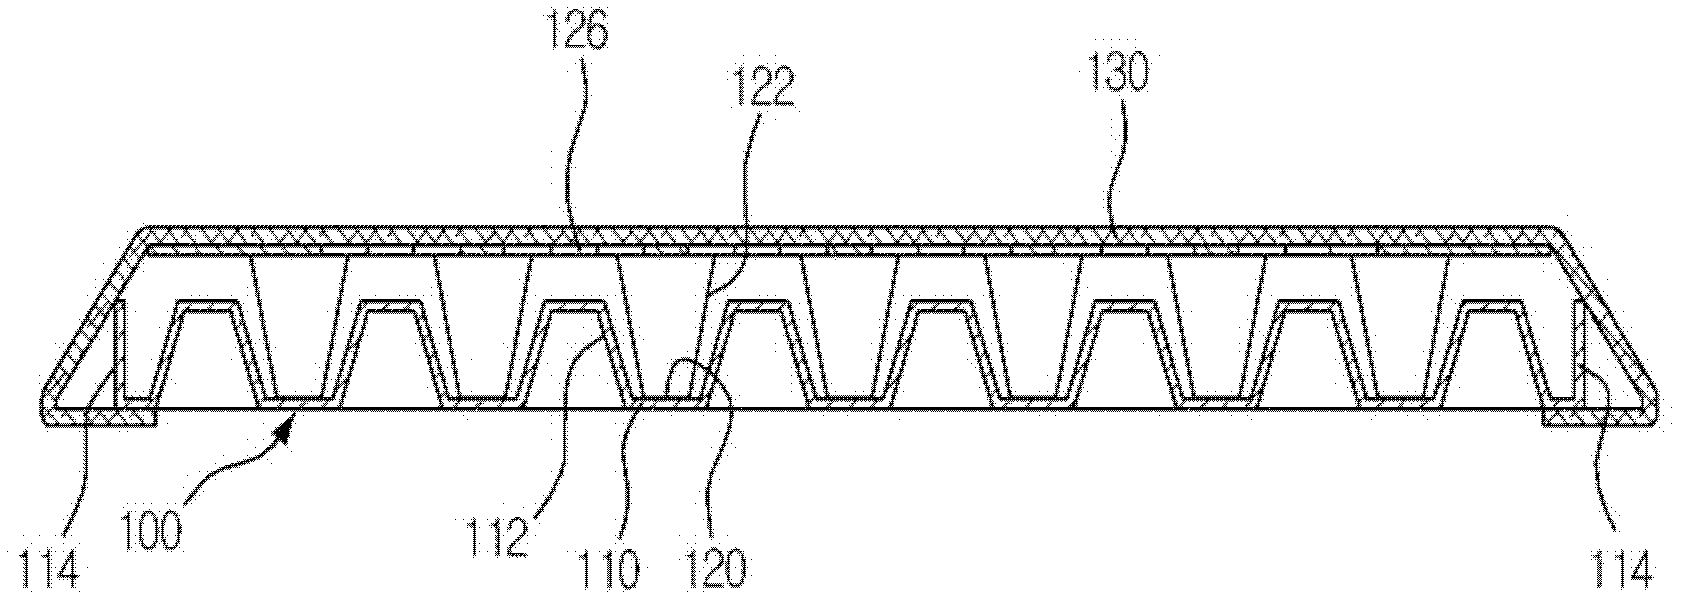 Drain board with functions of water draining, retaining, storing and collecting